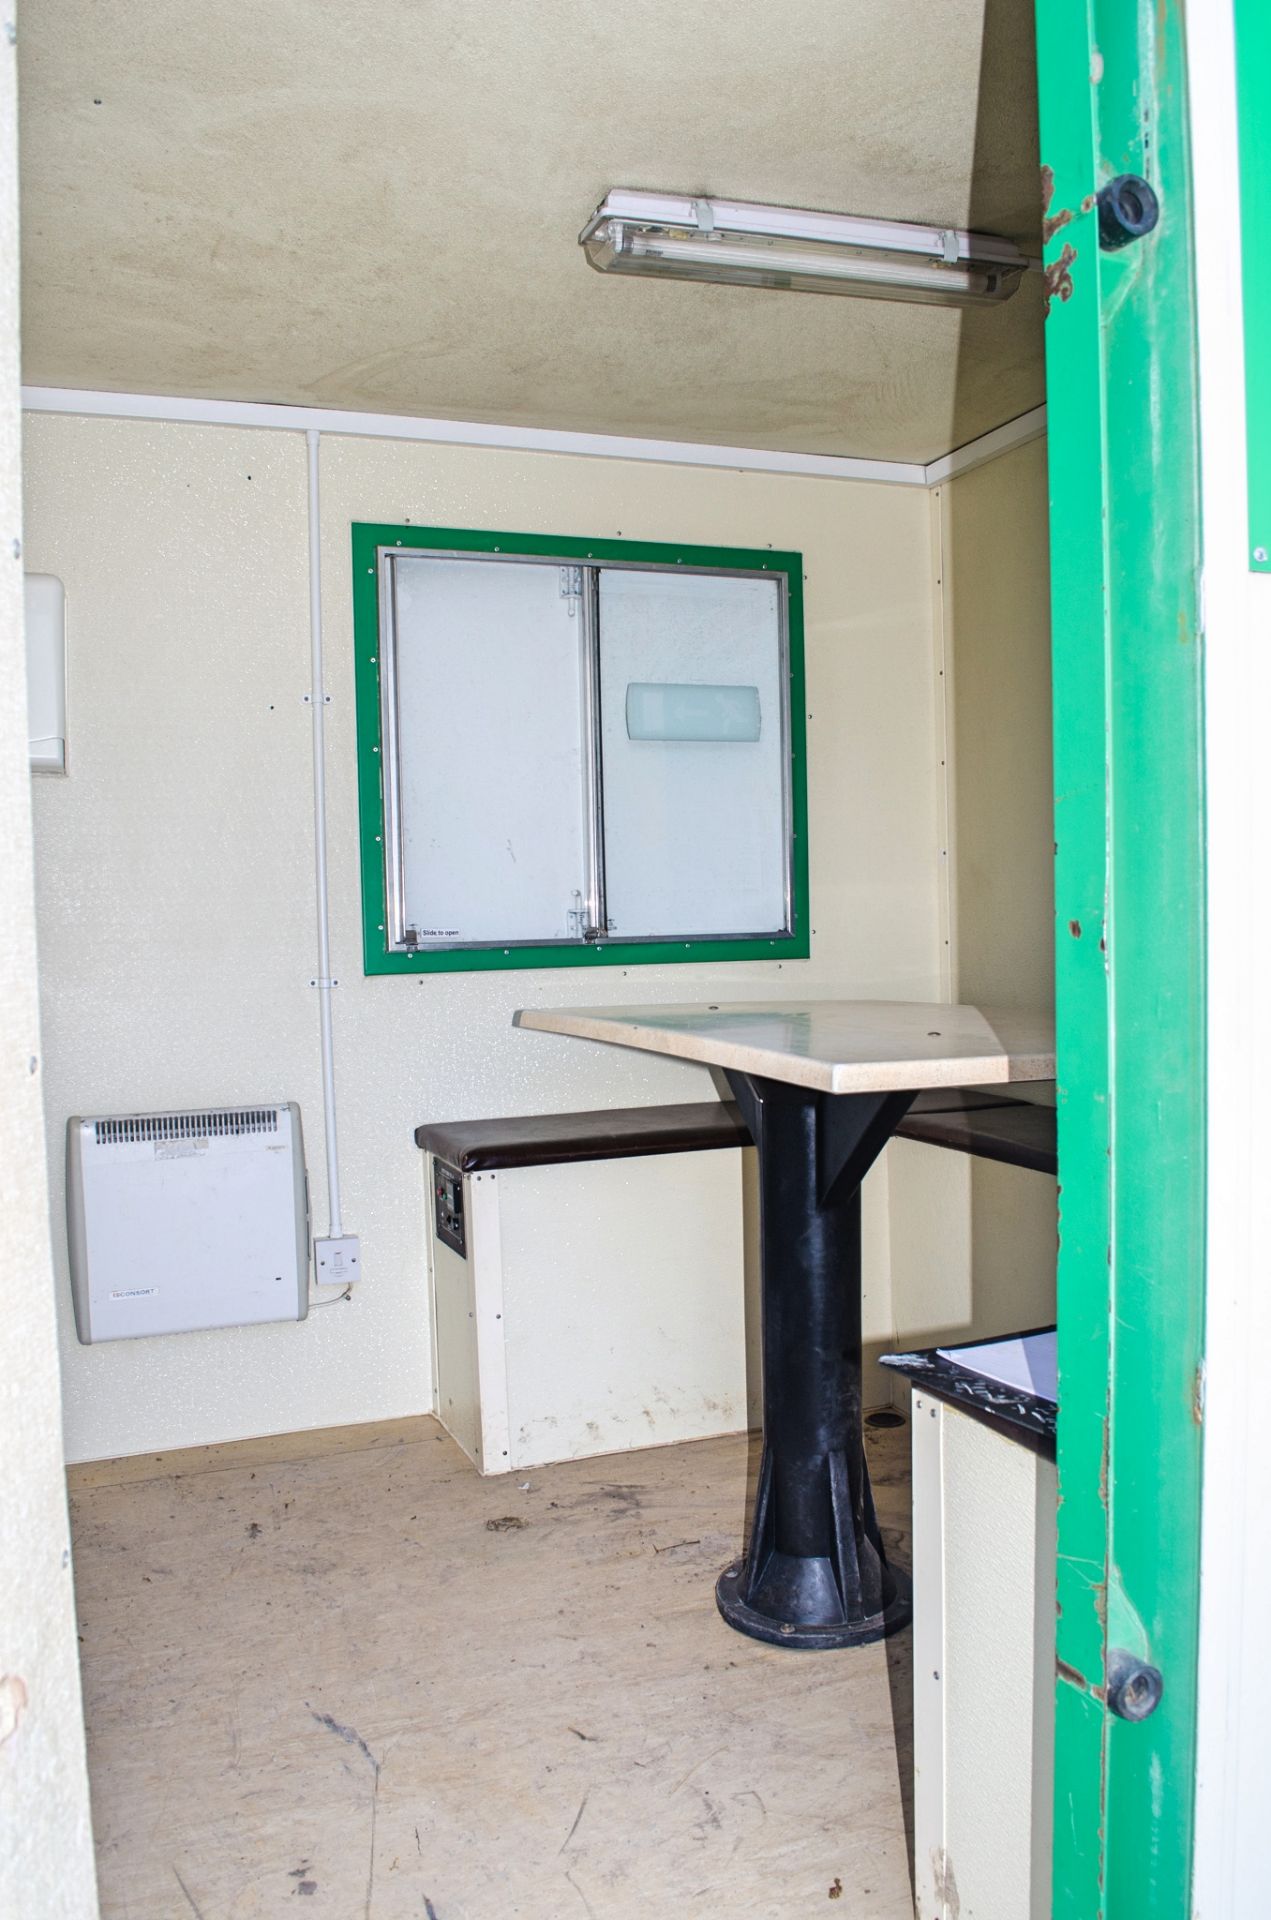 Groundhog 12 ft x 8 ft mobile welfare unit Comprising of: canteen area, toilet & generator room - Image 7 of 12